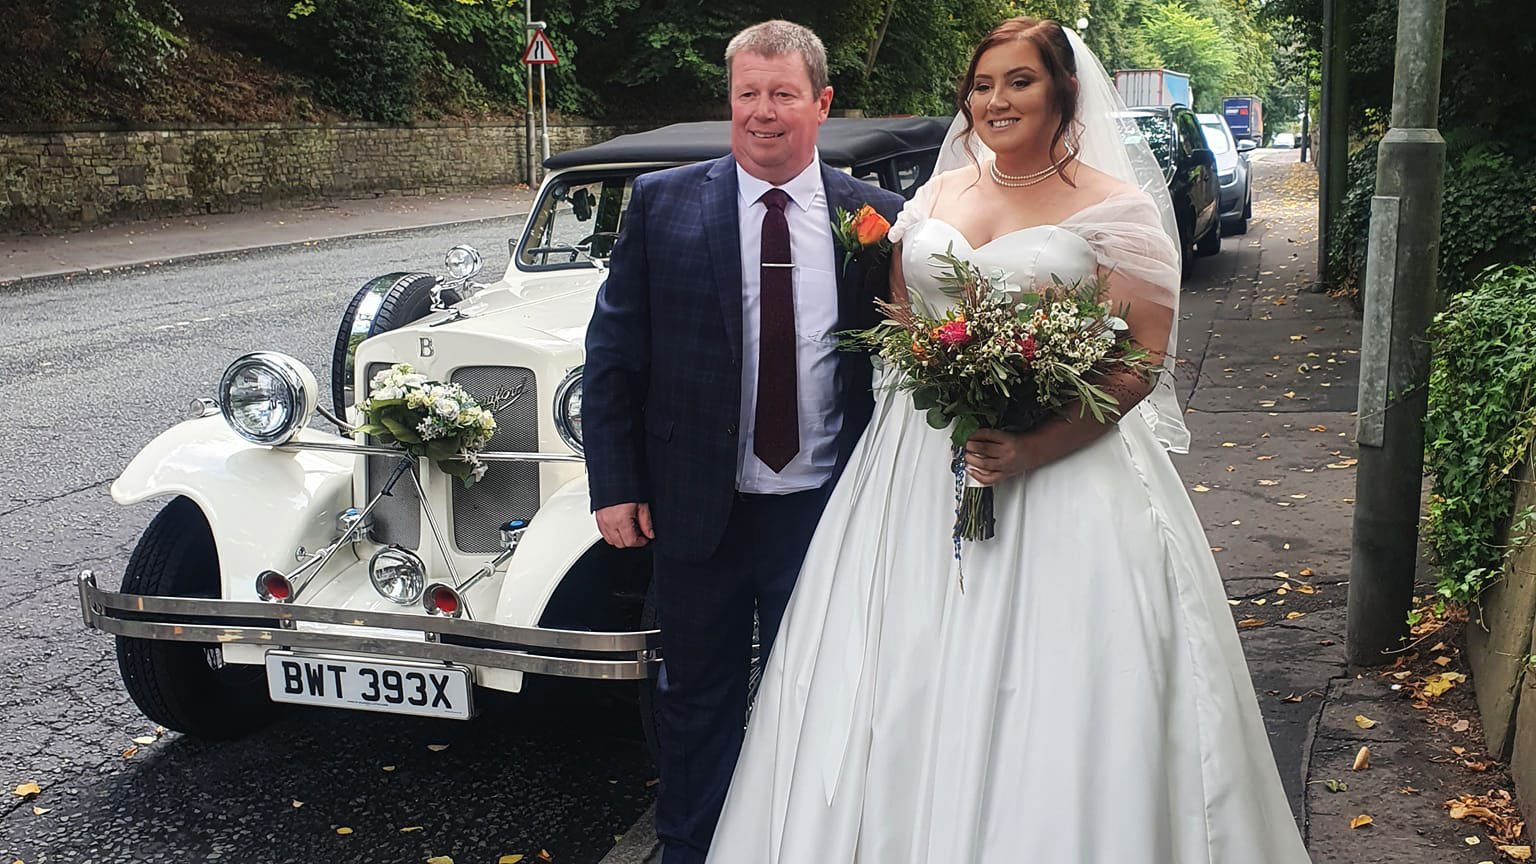 Bride with her bridal bouquet and her father in front of the vintage car